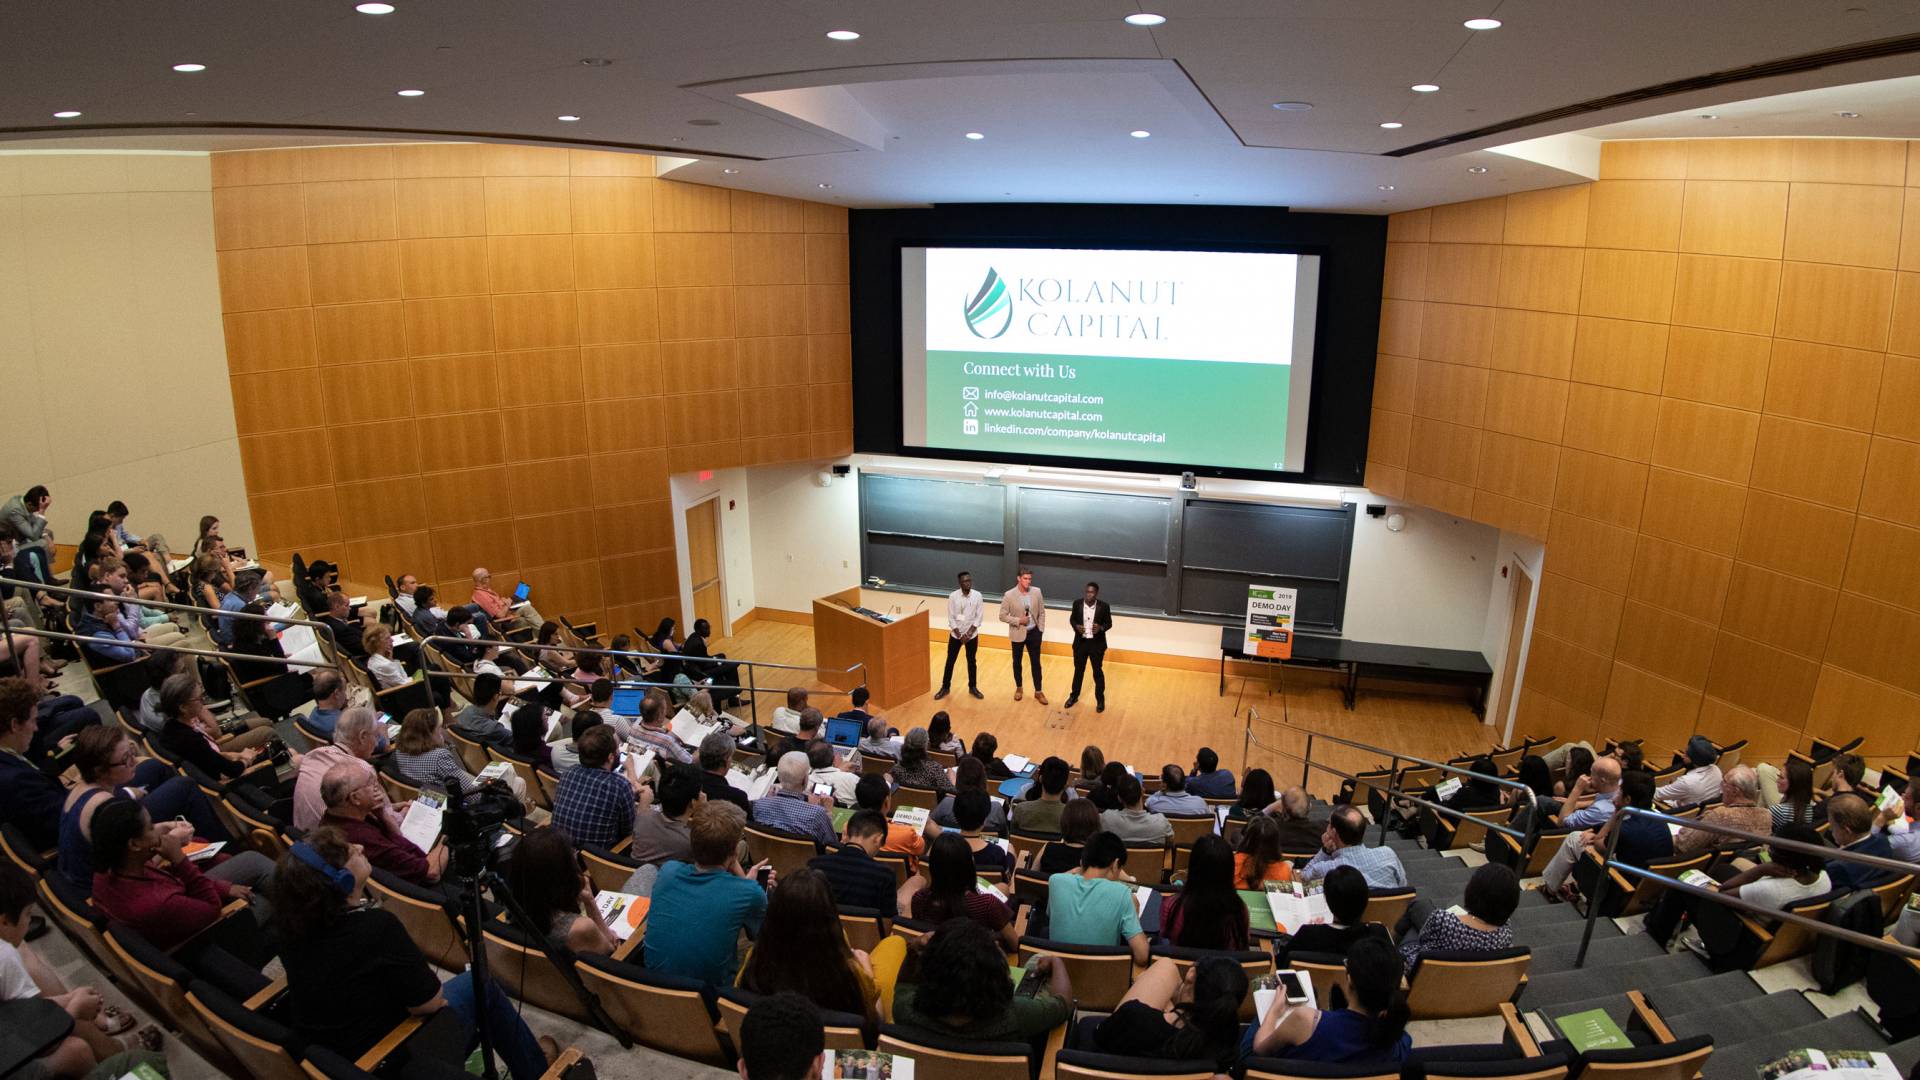 Teams presenting in an auditorium